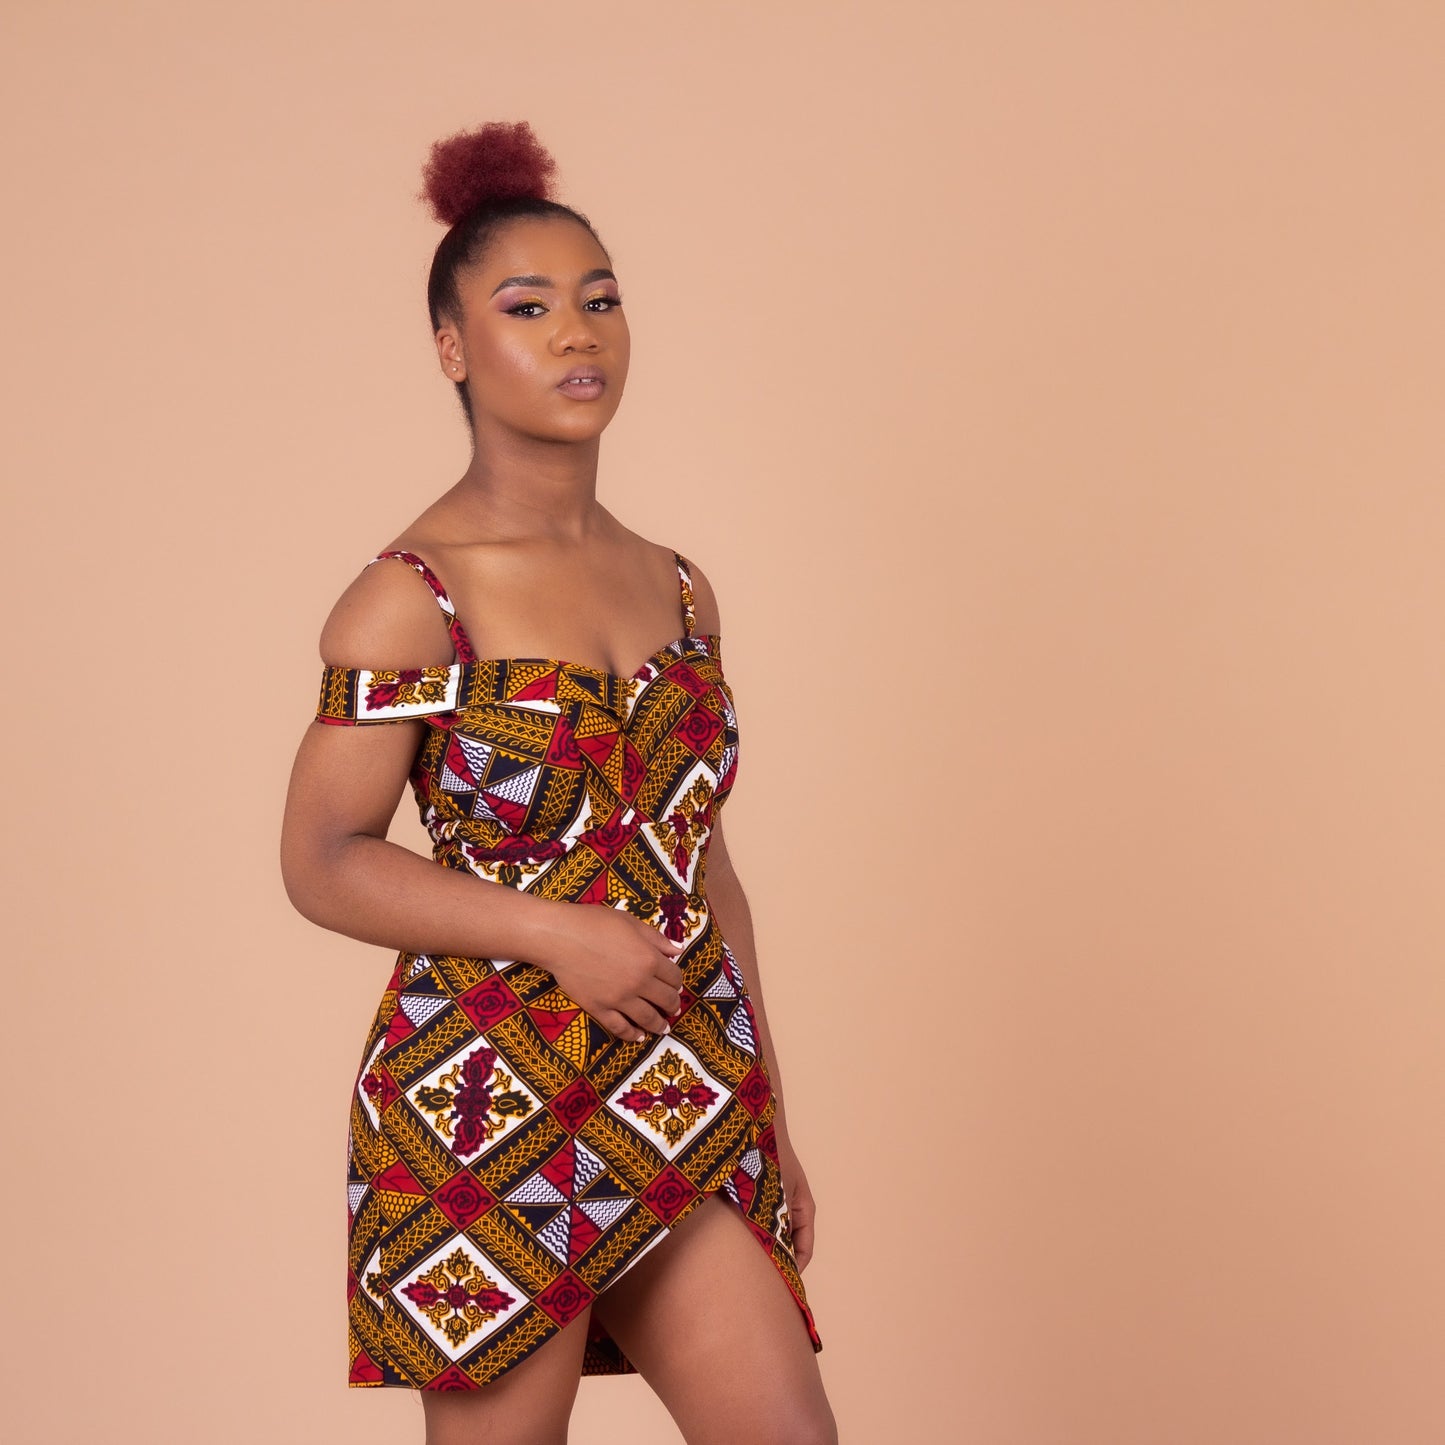 Red, yellow, white, and black Ankara wax print In African floral medallion pattern on a above knee high open pleated panelled dress with sweetheart neckline dress with off the shoulder straps, detailed with smaller spaghetti straps.